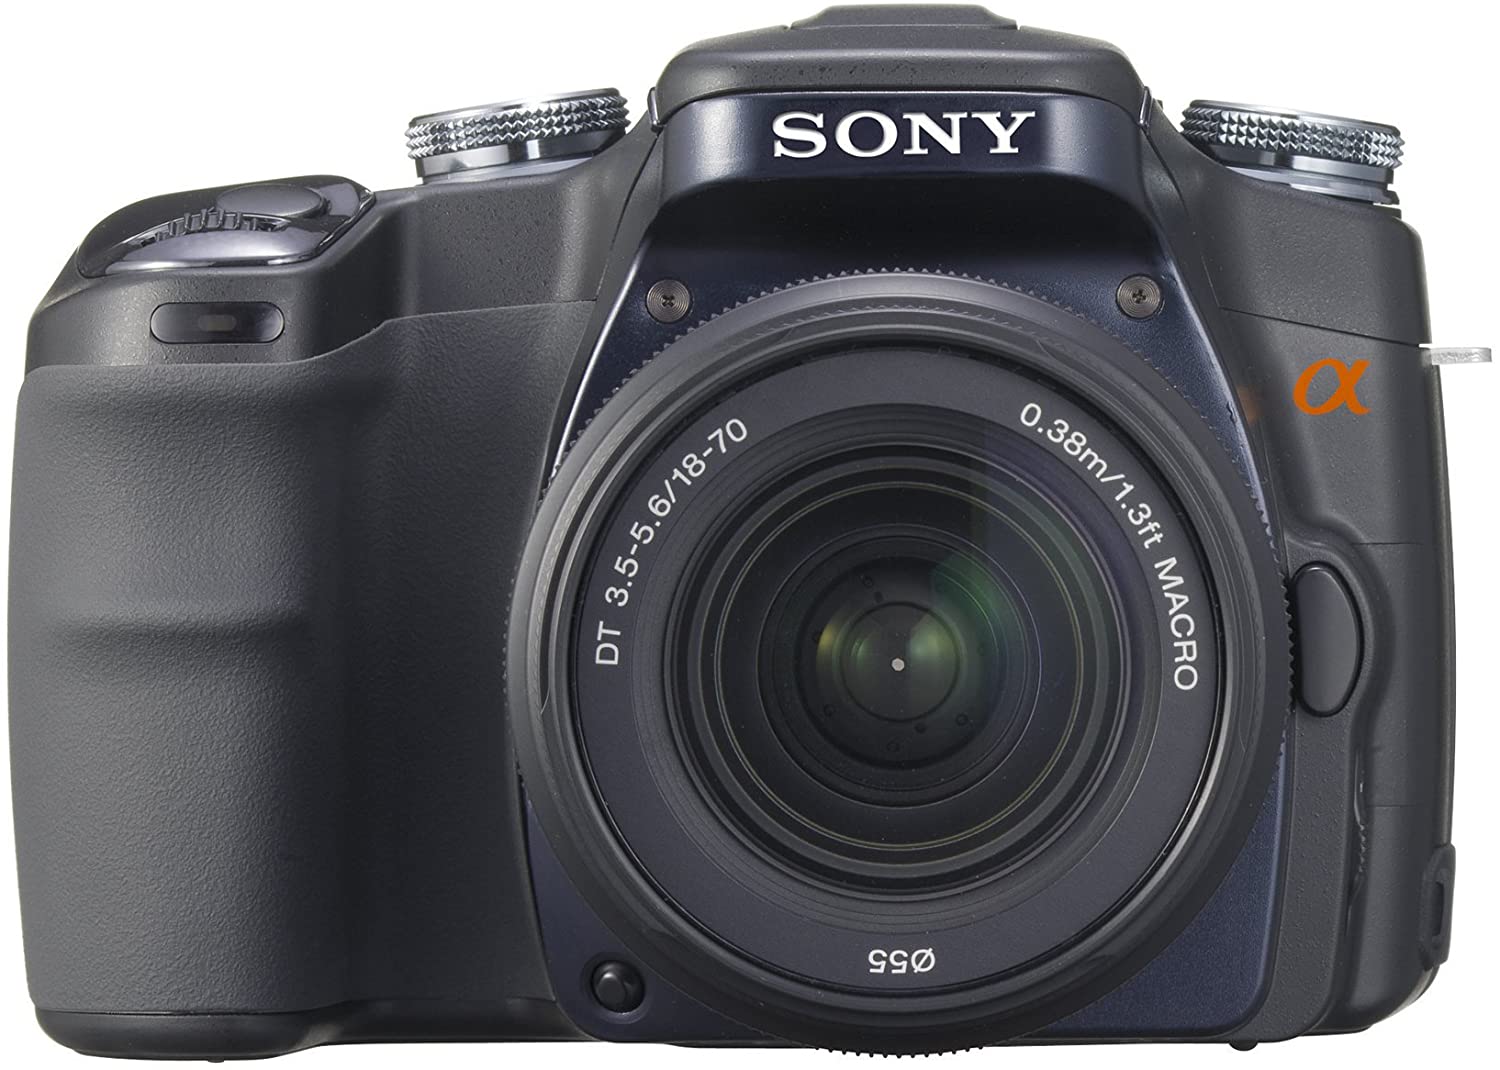 PHOTOGRAPHIC CENTRAL: Sony A100: Why I Will Always Love It